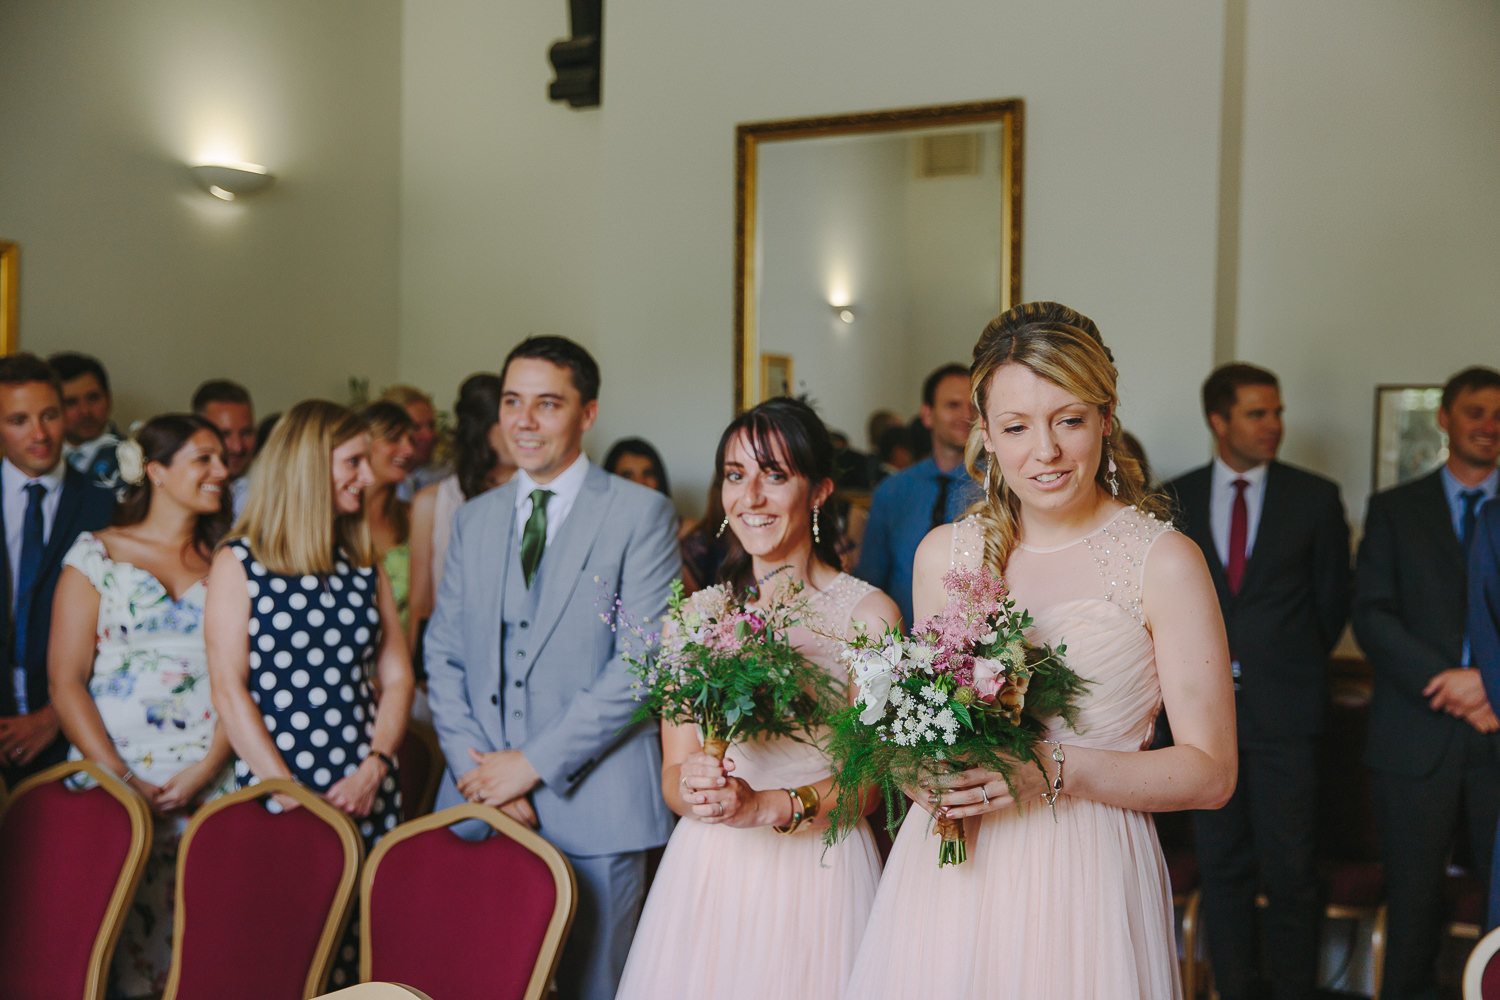 Bridesmaids wearing pink dresses arriving for the wedding inside Ely Registry Office photographed by an Ely Wedding Photographer